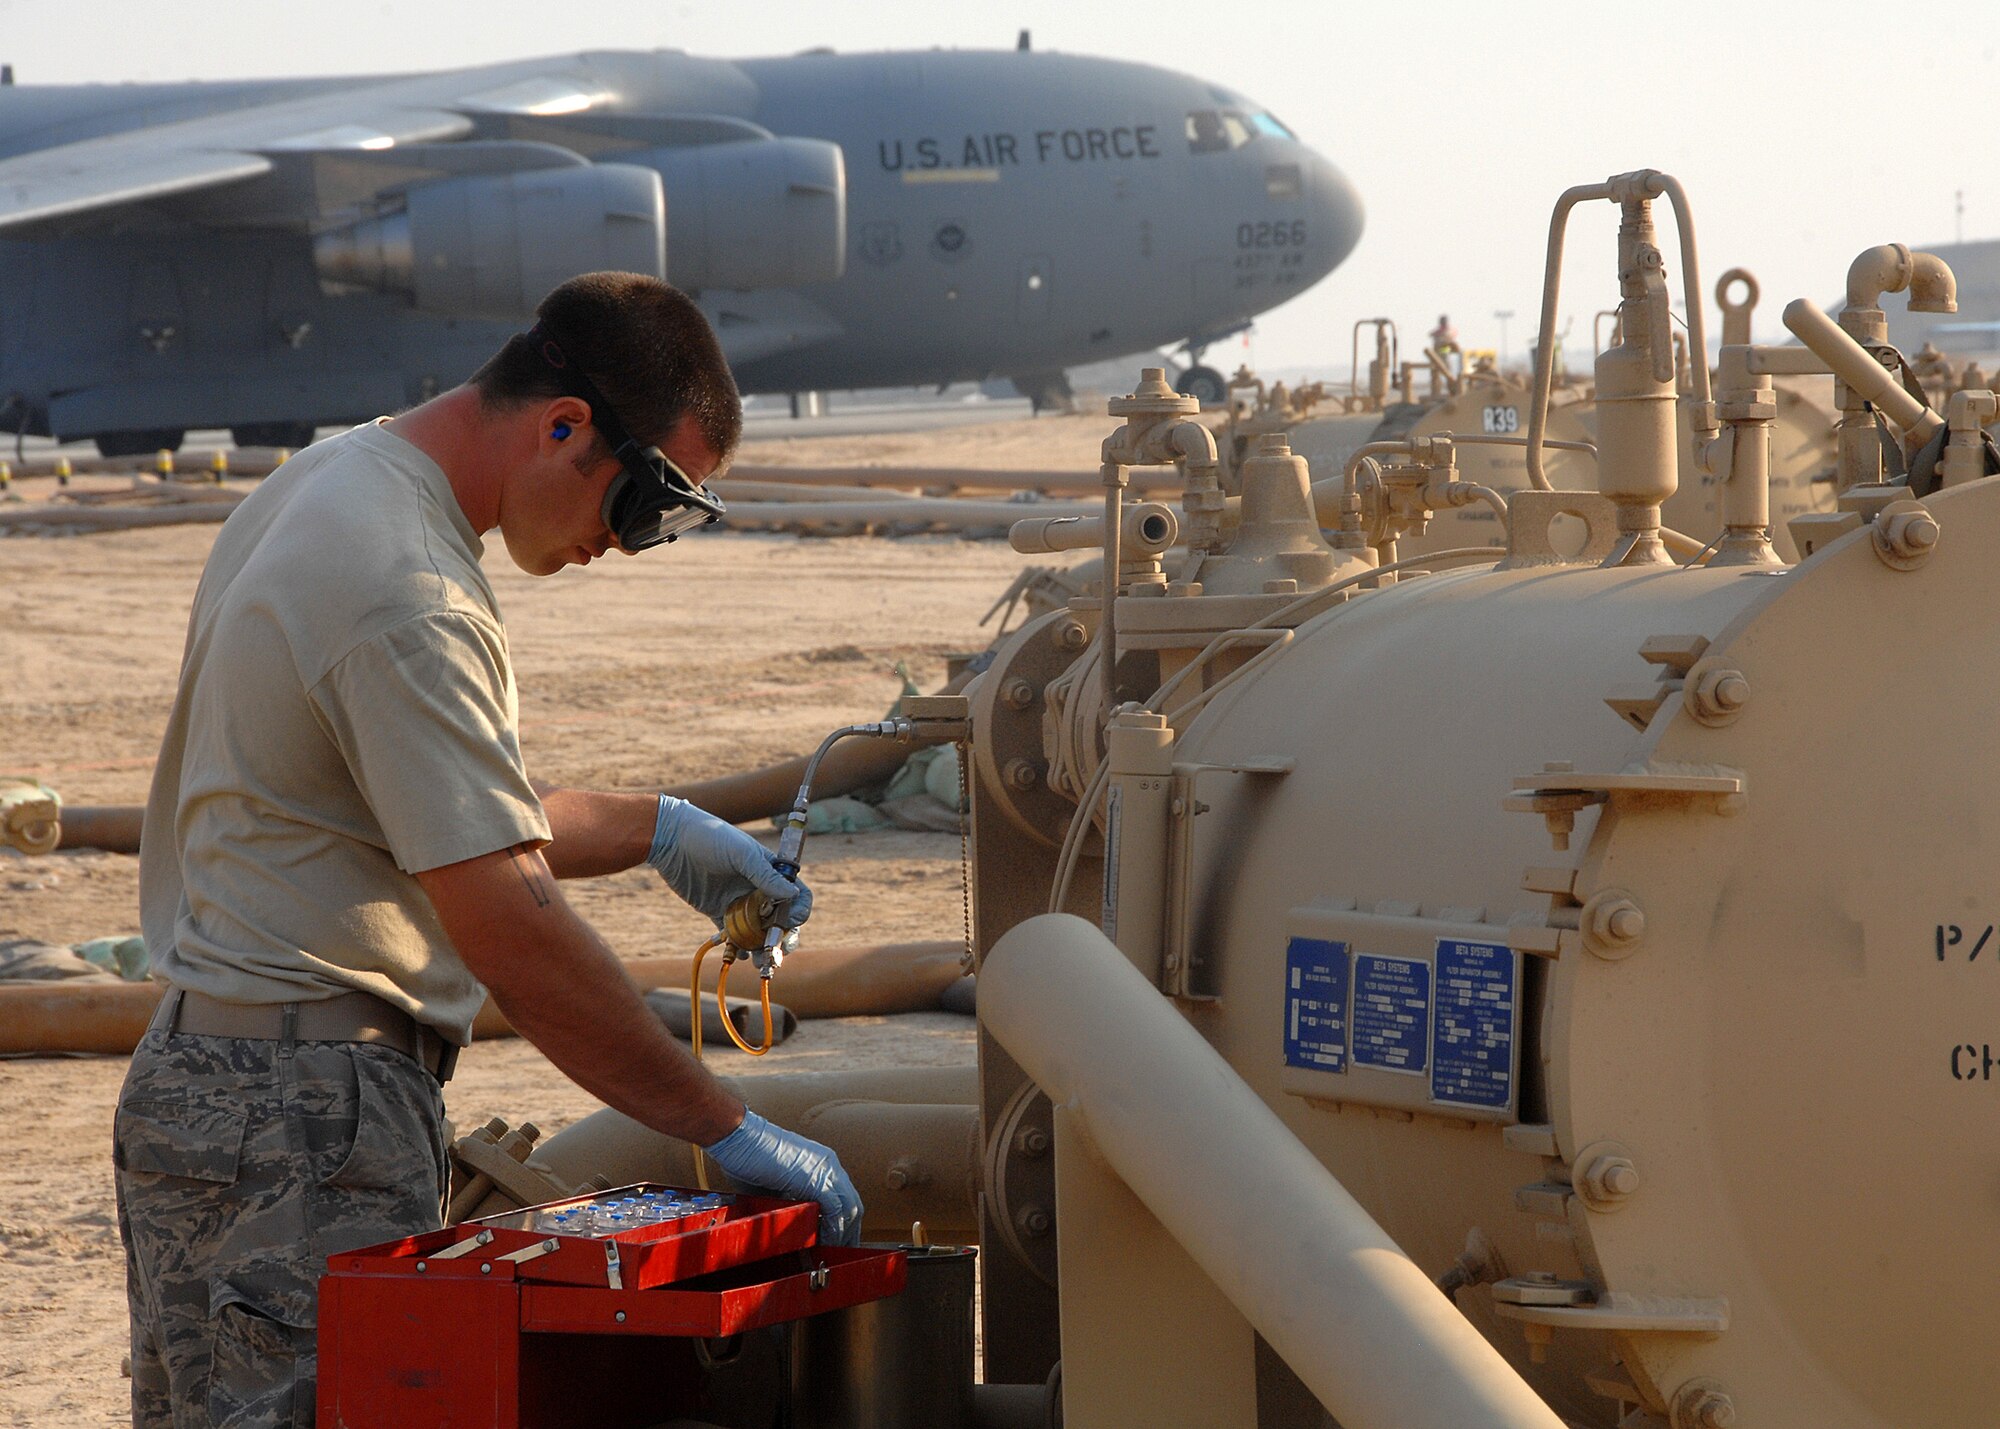 SOUTHWEST ASIA -- Staff Sgt. Michelangelo Serio, 386th Expeditionary Logistics Readiness Squadron Fuels Management Flight, takes fuel samples from a FORCE Fuel machine on Nov. 4 at an air base in Southwest Asia. Sergeant Serio is deployed from Aviano Air Base, Italy. (U.S. Air Force photo/Tech. Sgt. Raheem Moore)